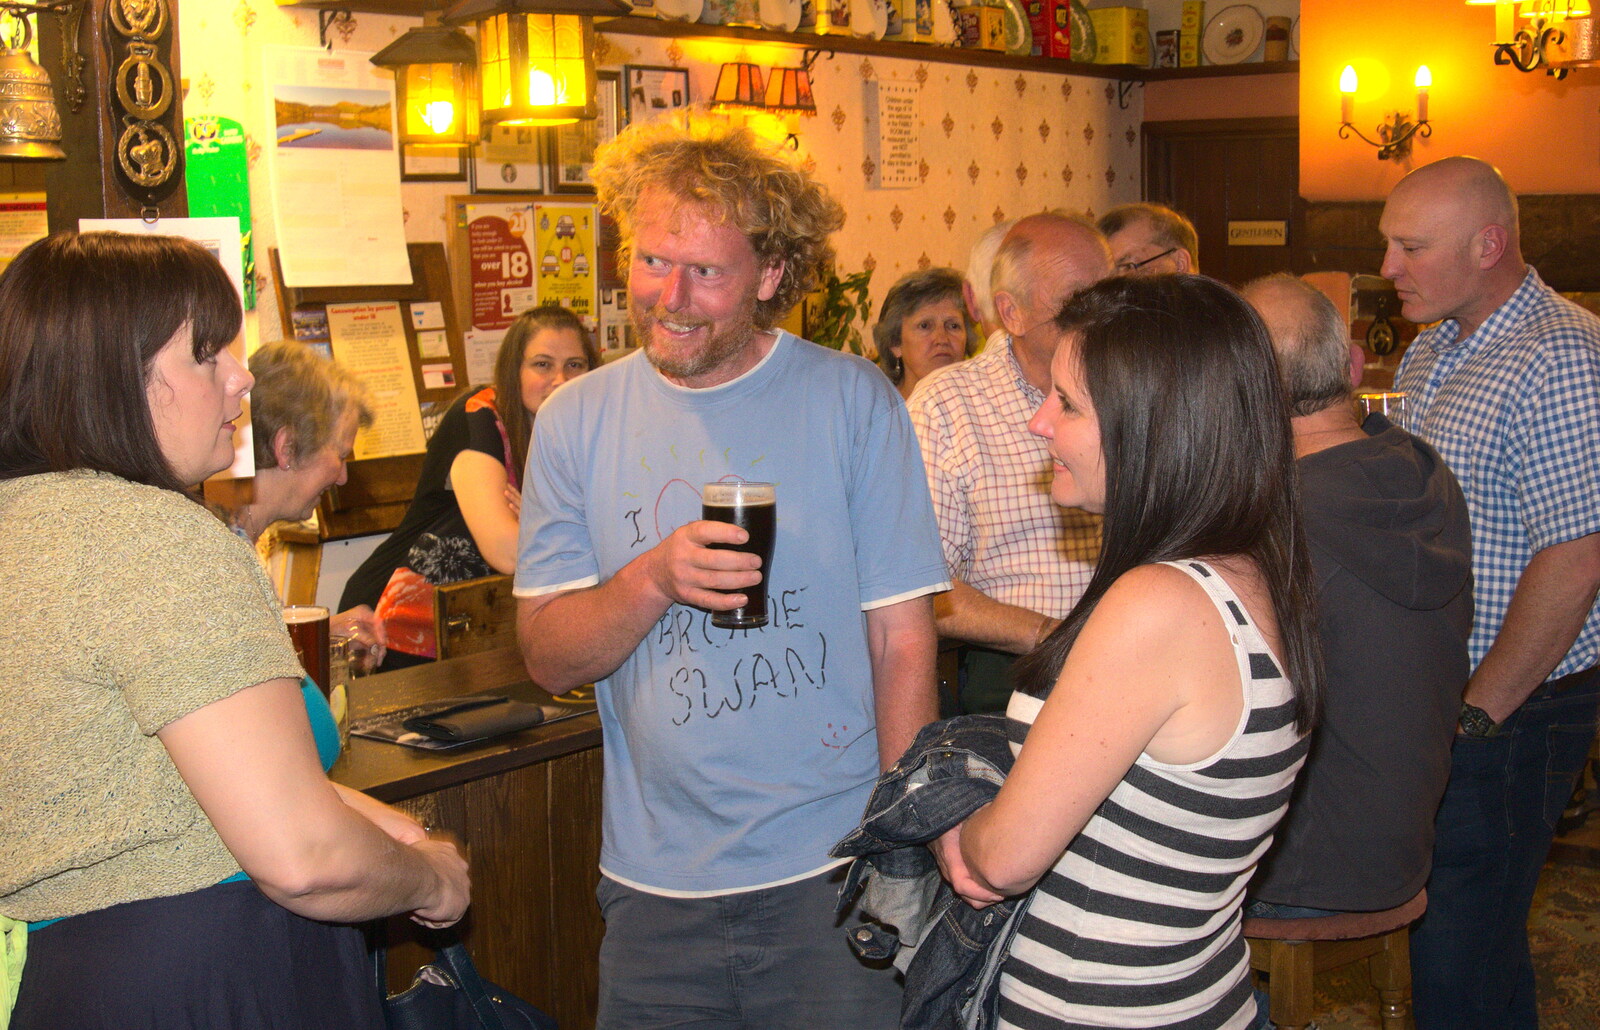 Wavy's got a pint from A Retirement: The Last Night of The Swan Inn, Brome, Suffolk - 3rd June 2017